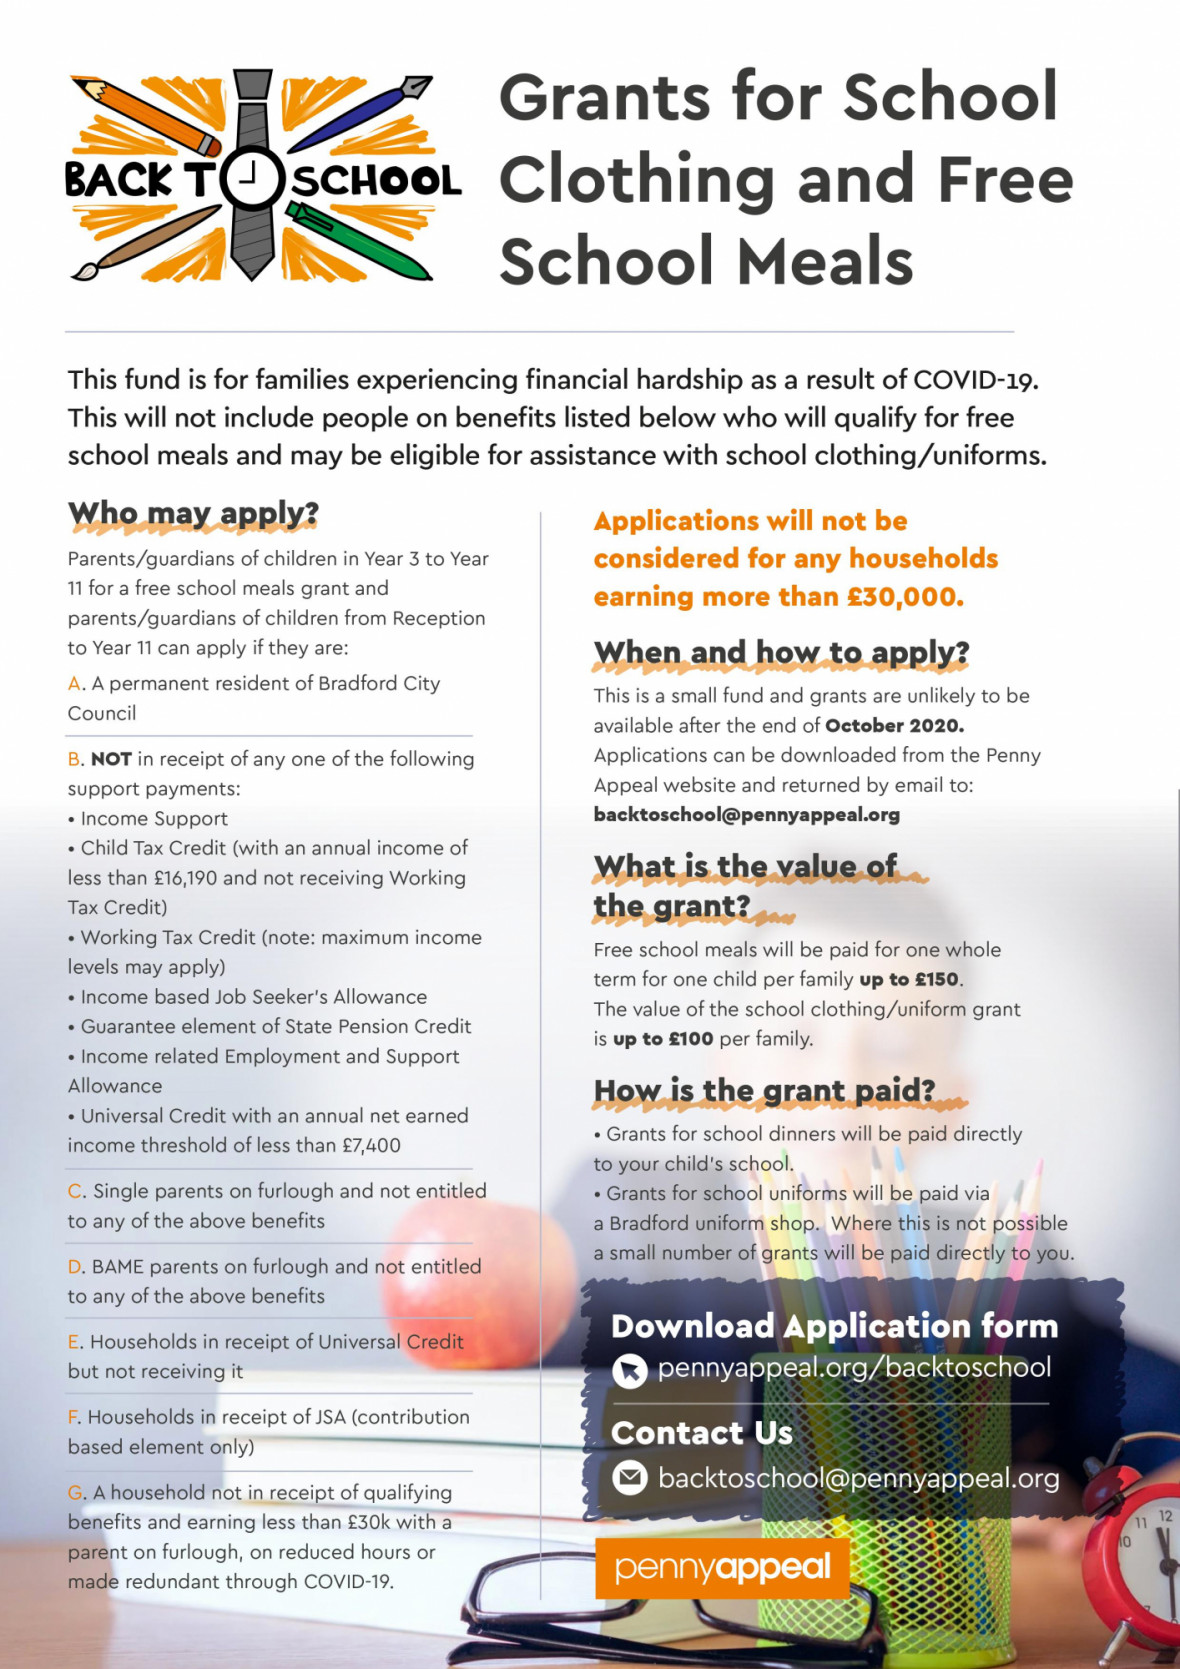 020920 grants for clothing & free school meals